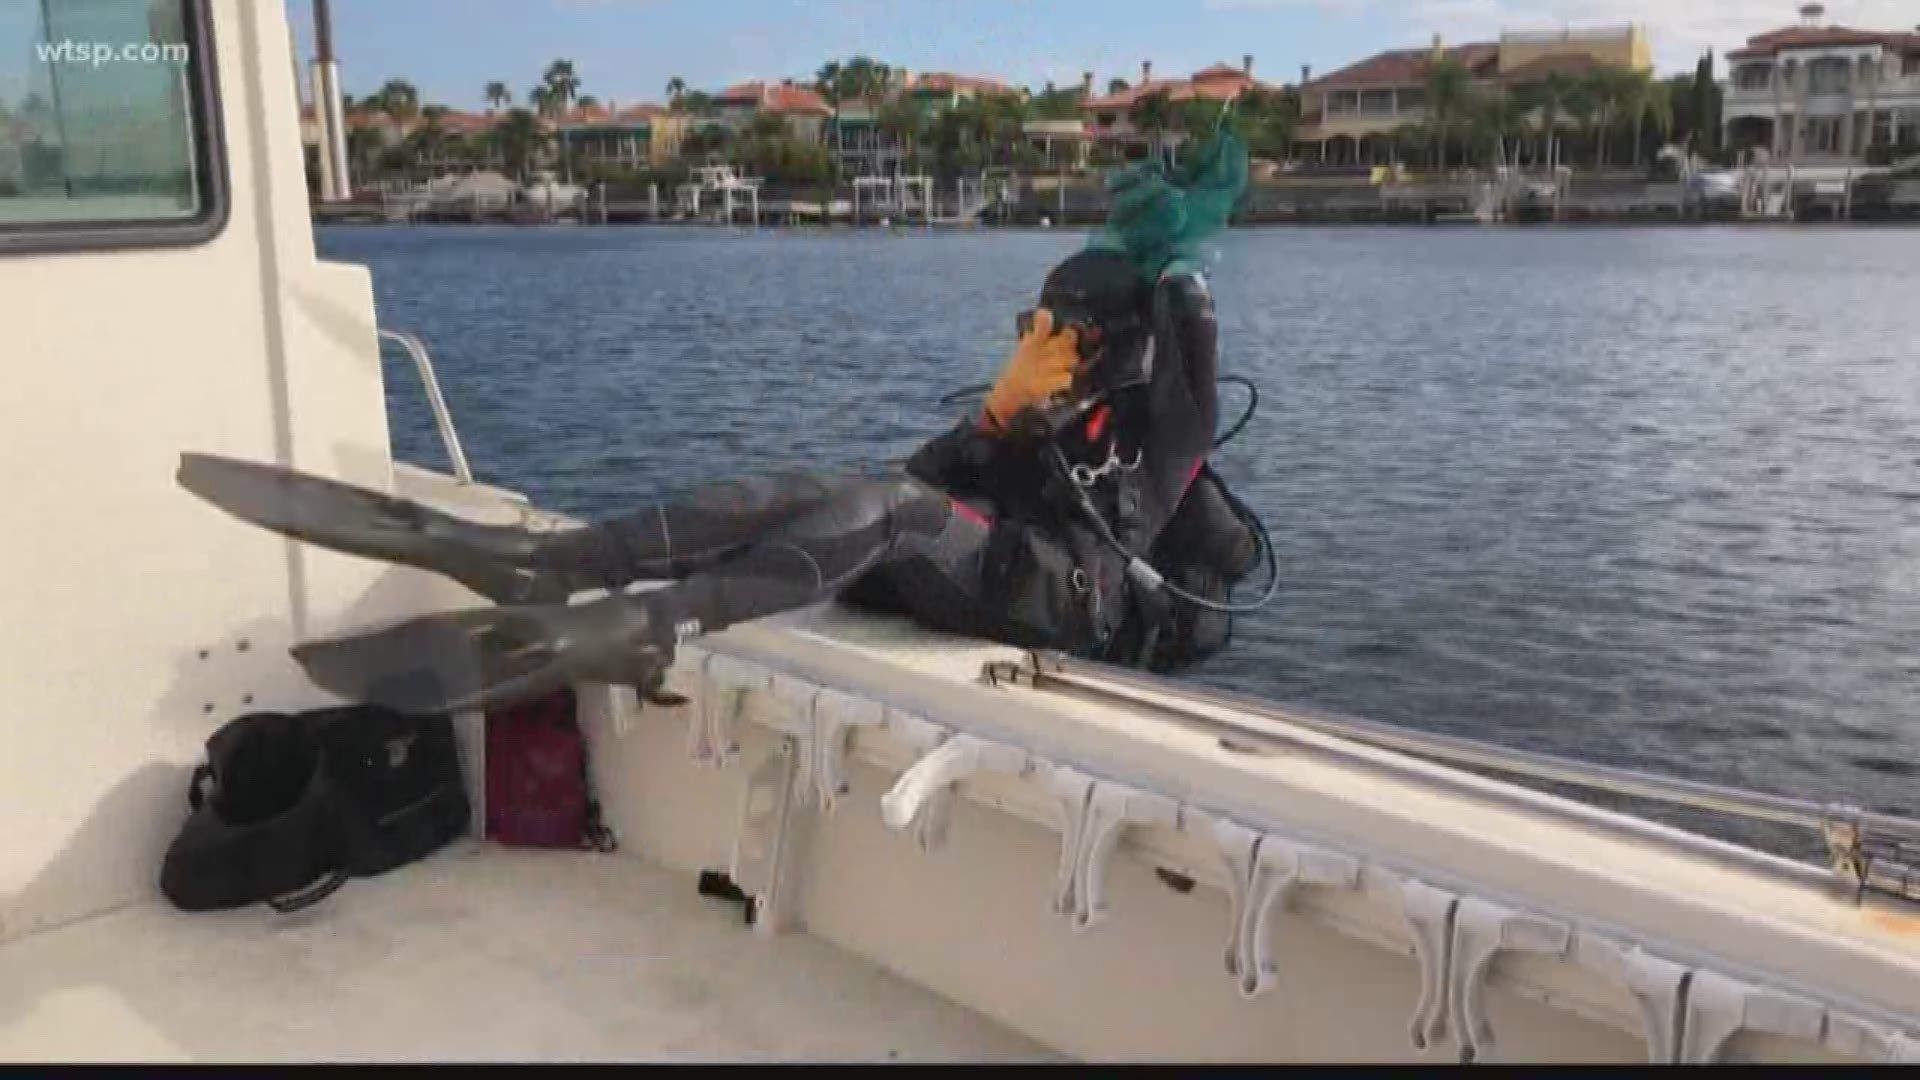 After the success of the Green Gasparilla, organizers push for the "Bead Free Bay" initiative.